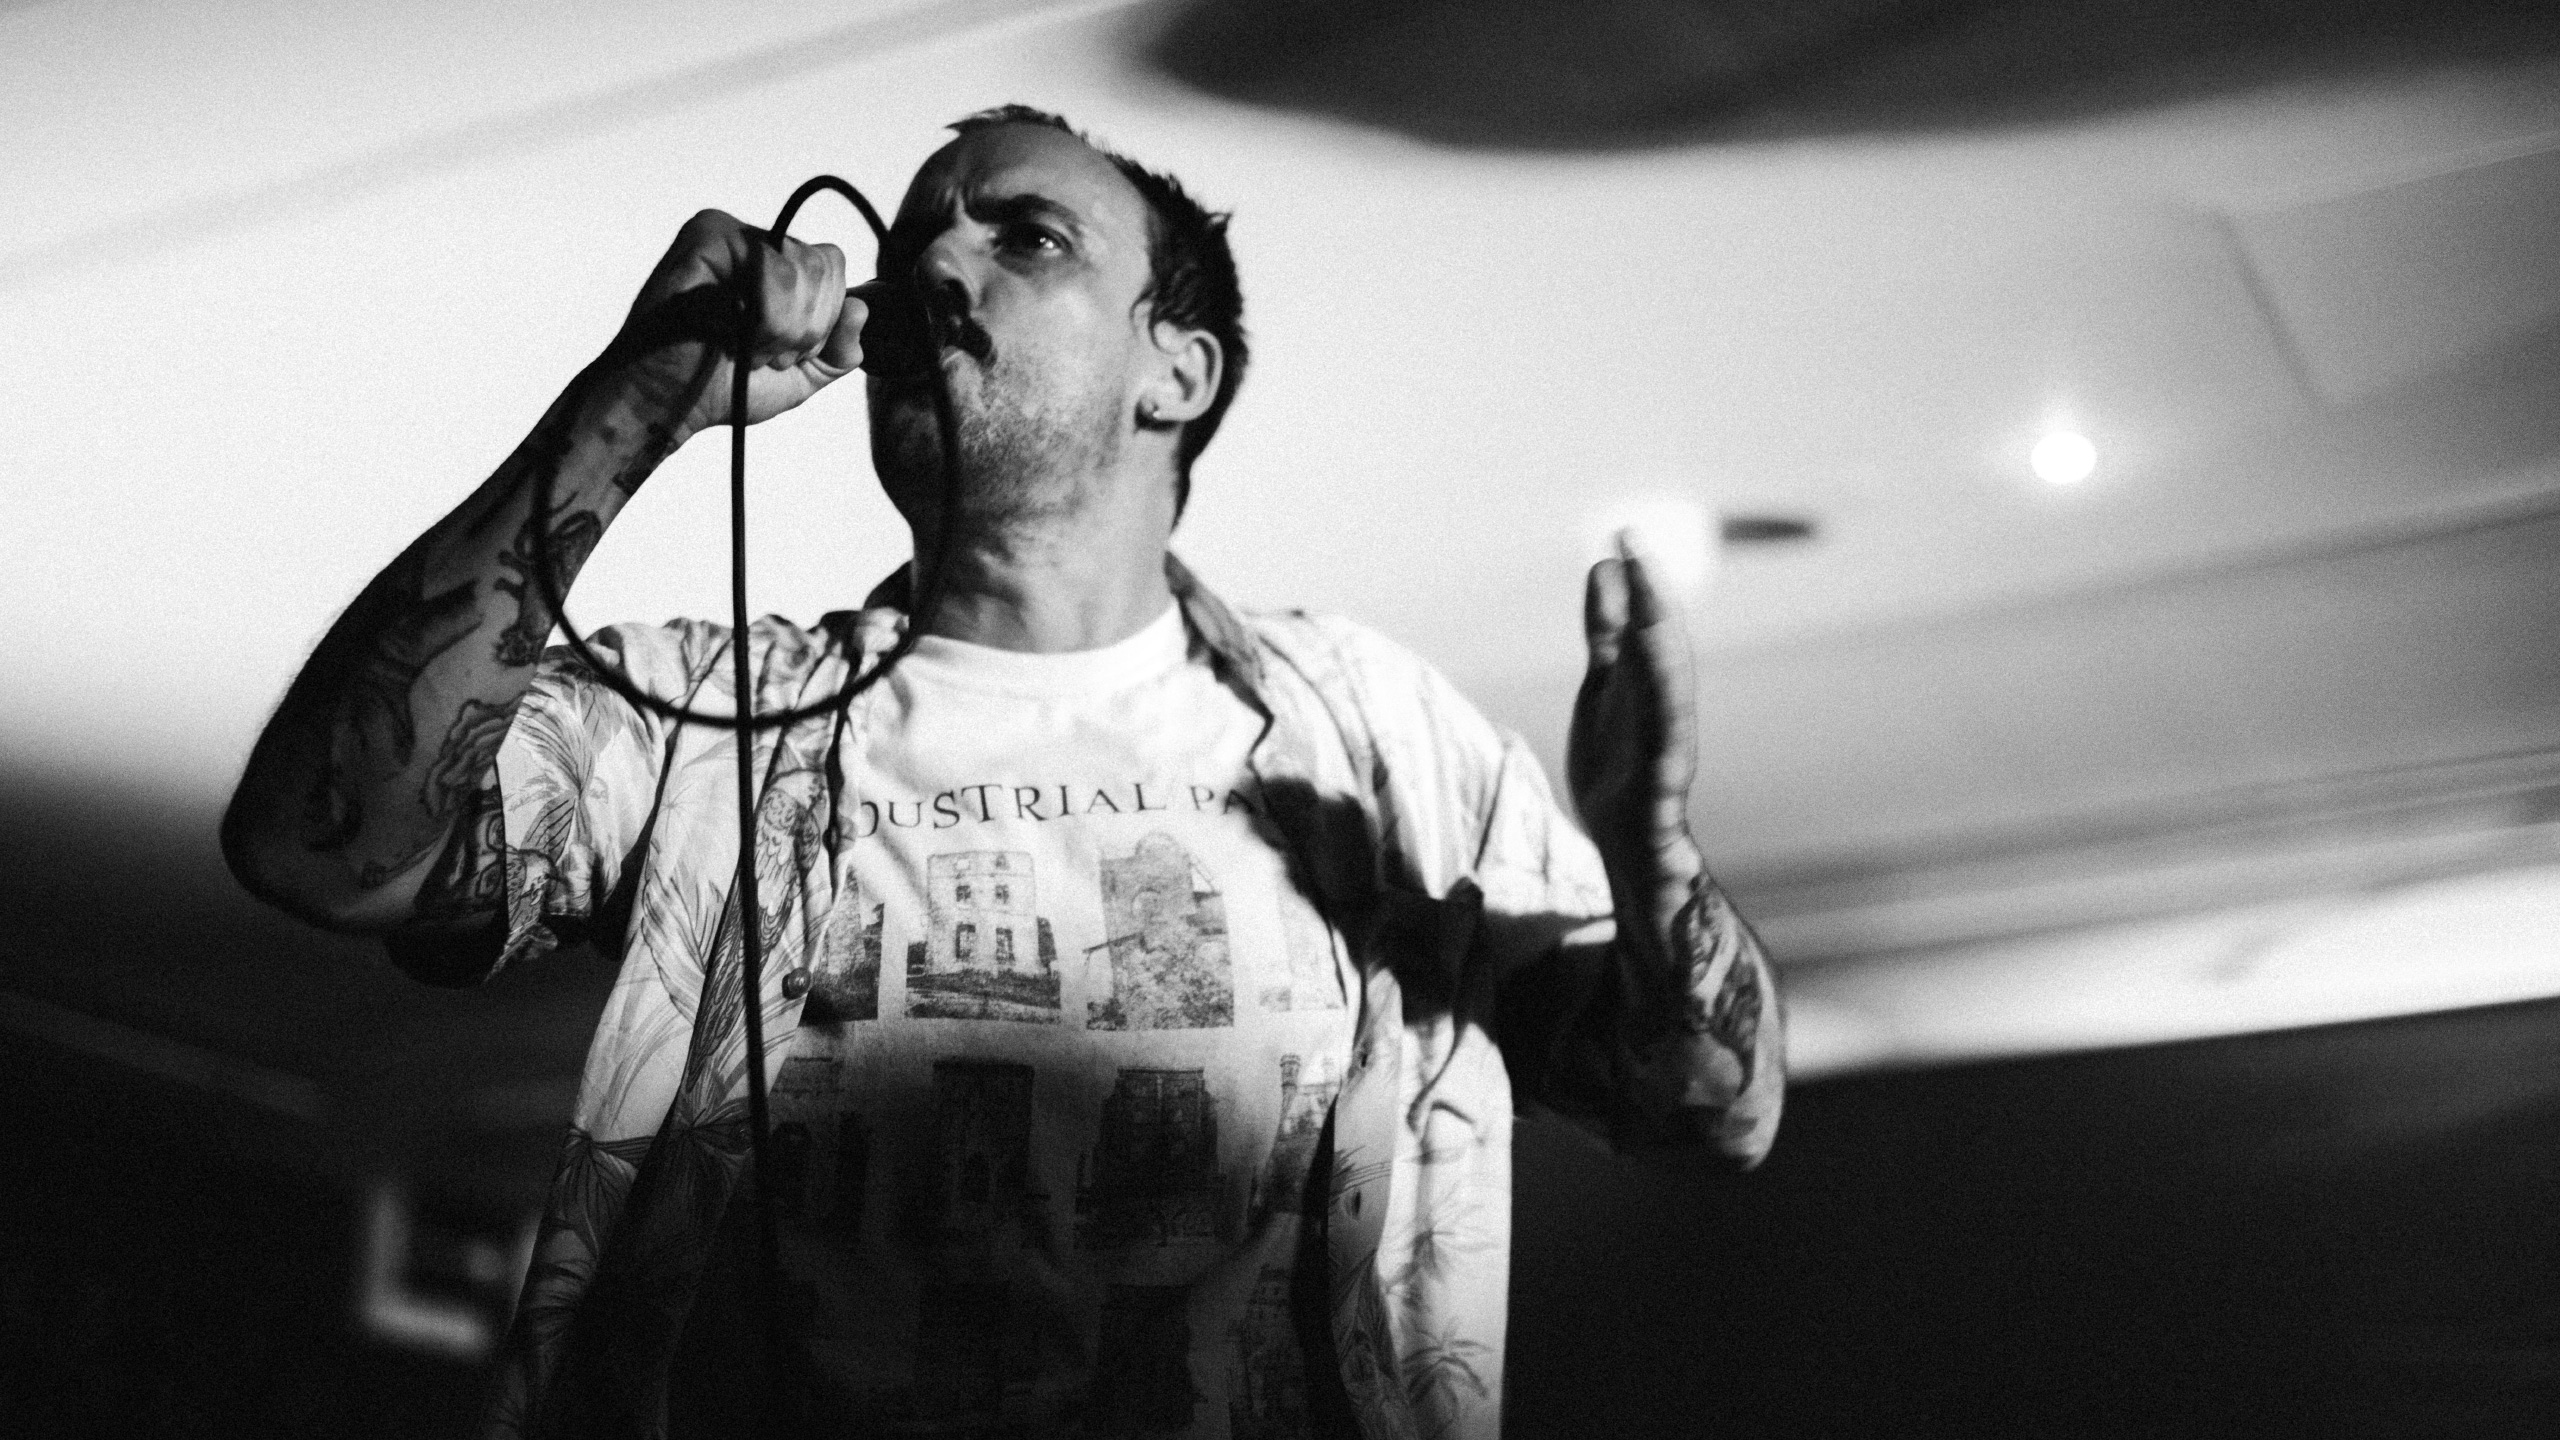 Idles frontman Joe Talbot performing at PRS for Music Presents